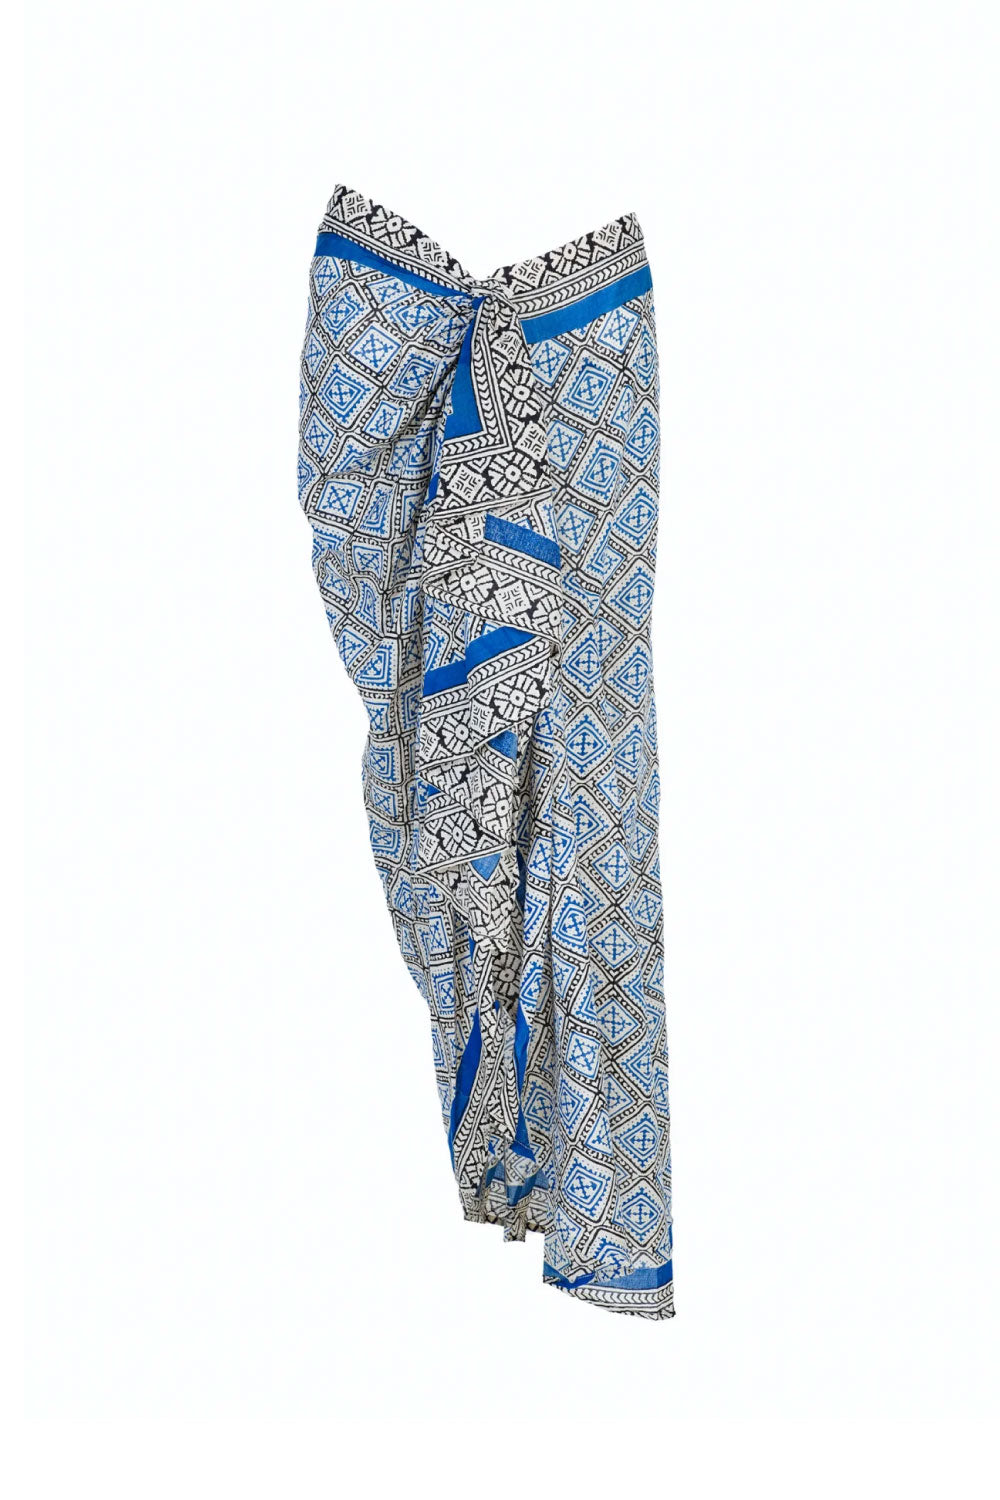 Image of the front of Guadalupe Design's Teresa Pareo Skirt in Blue.